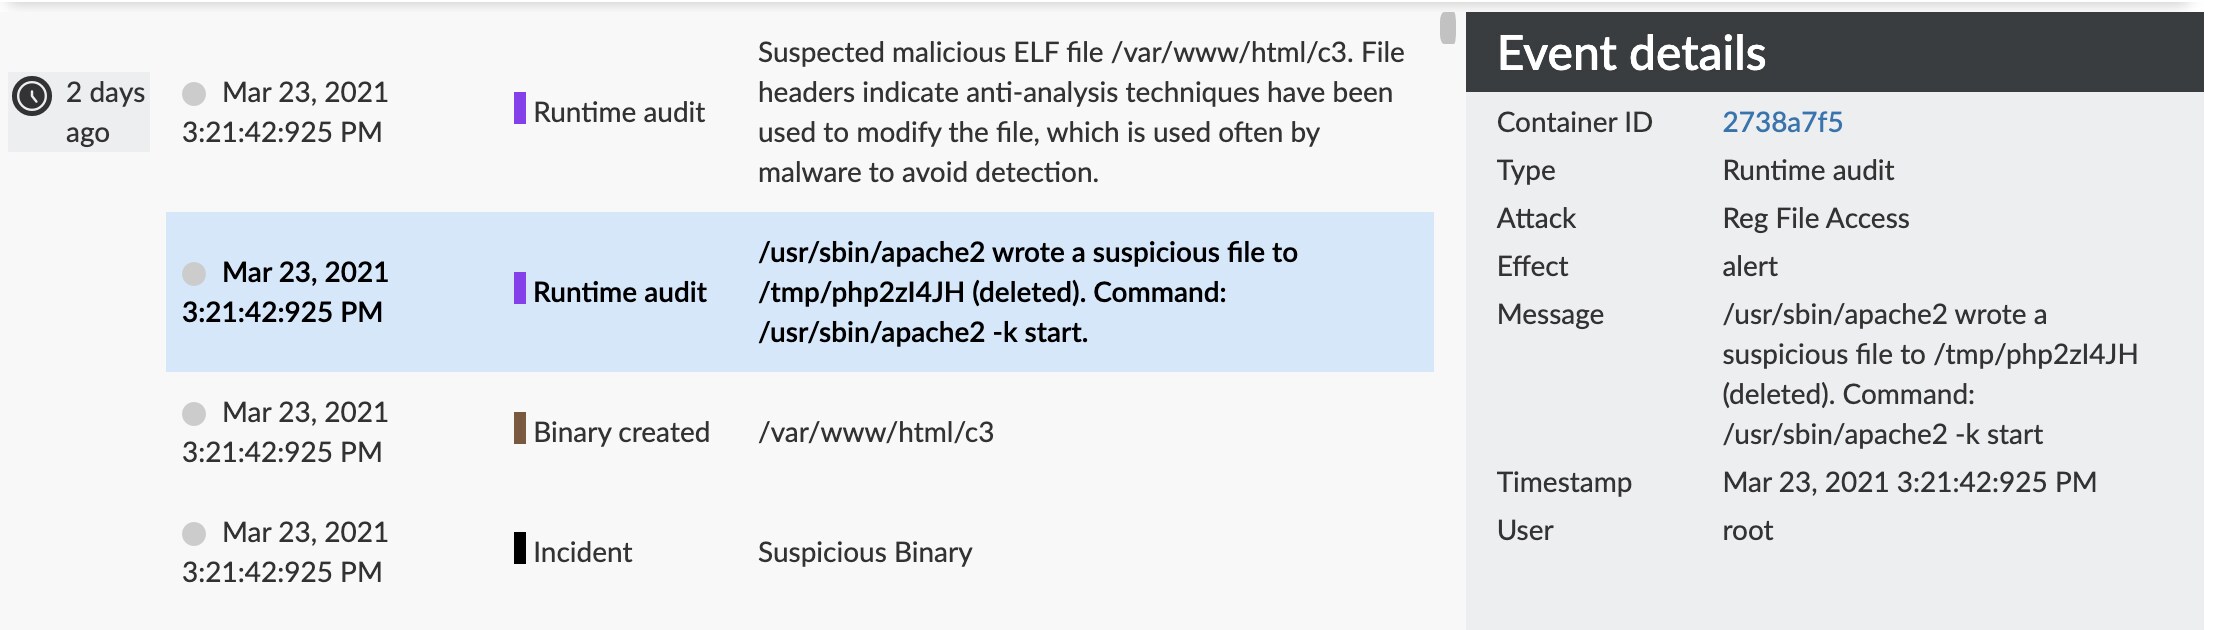 Event details showing that a user created suspicious files